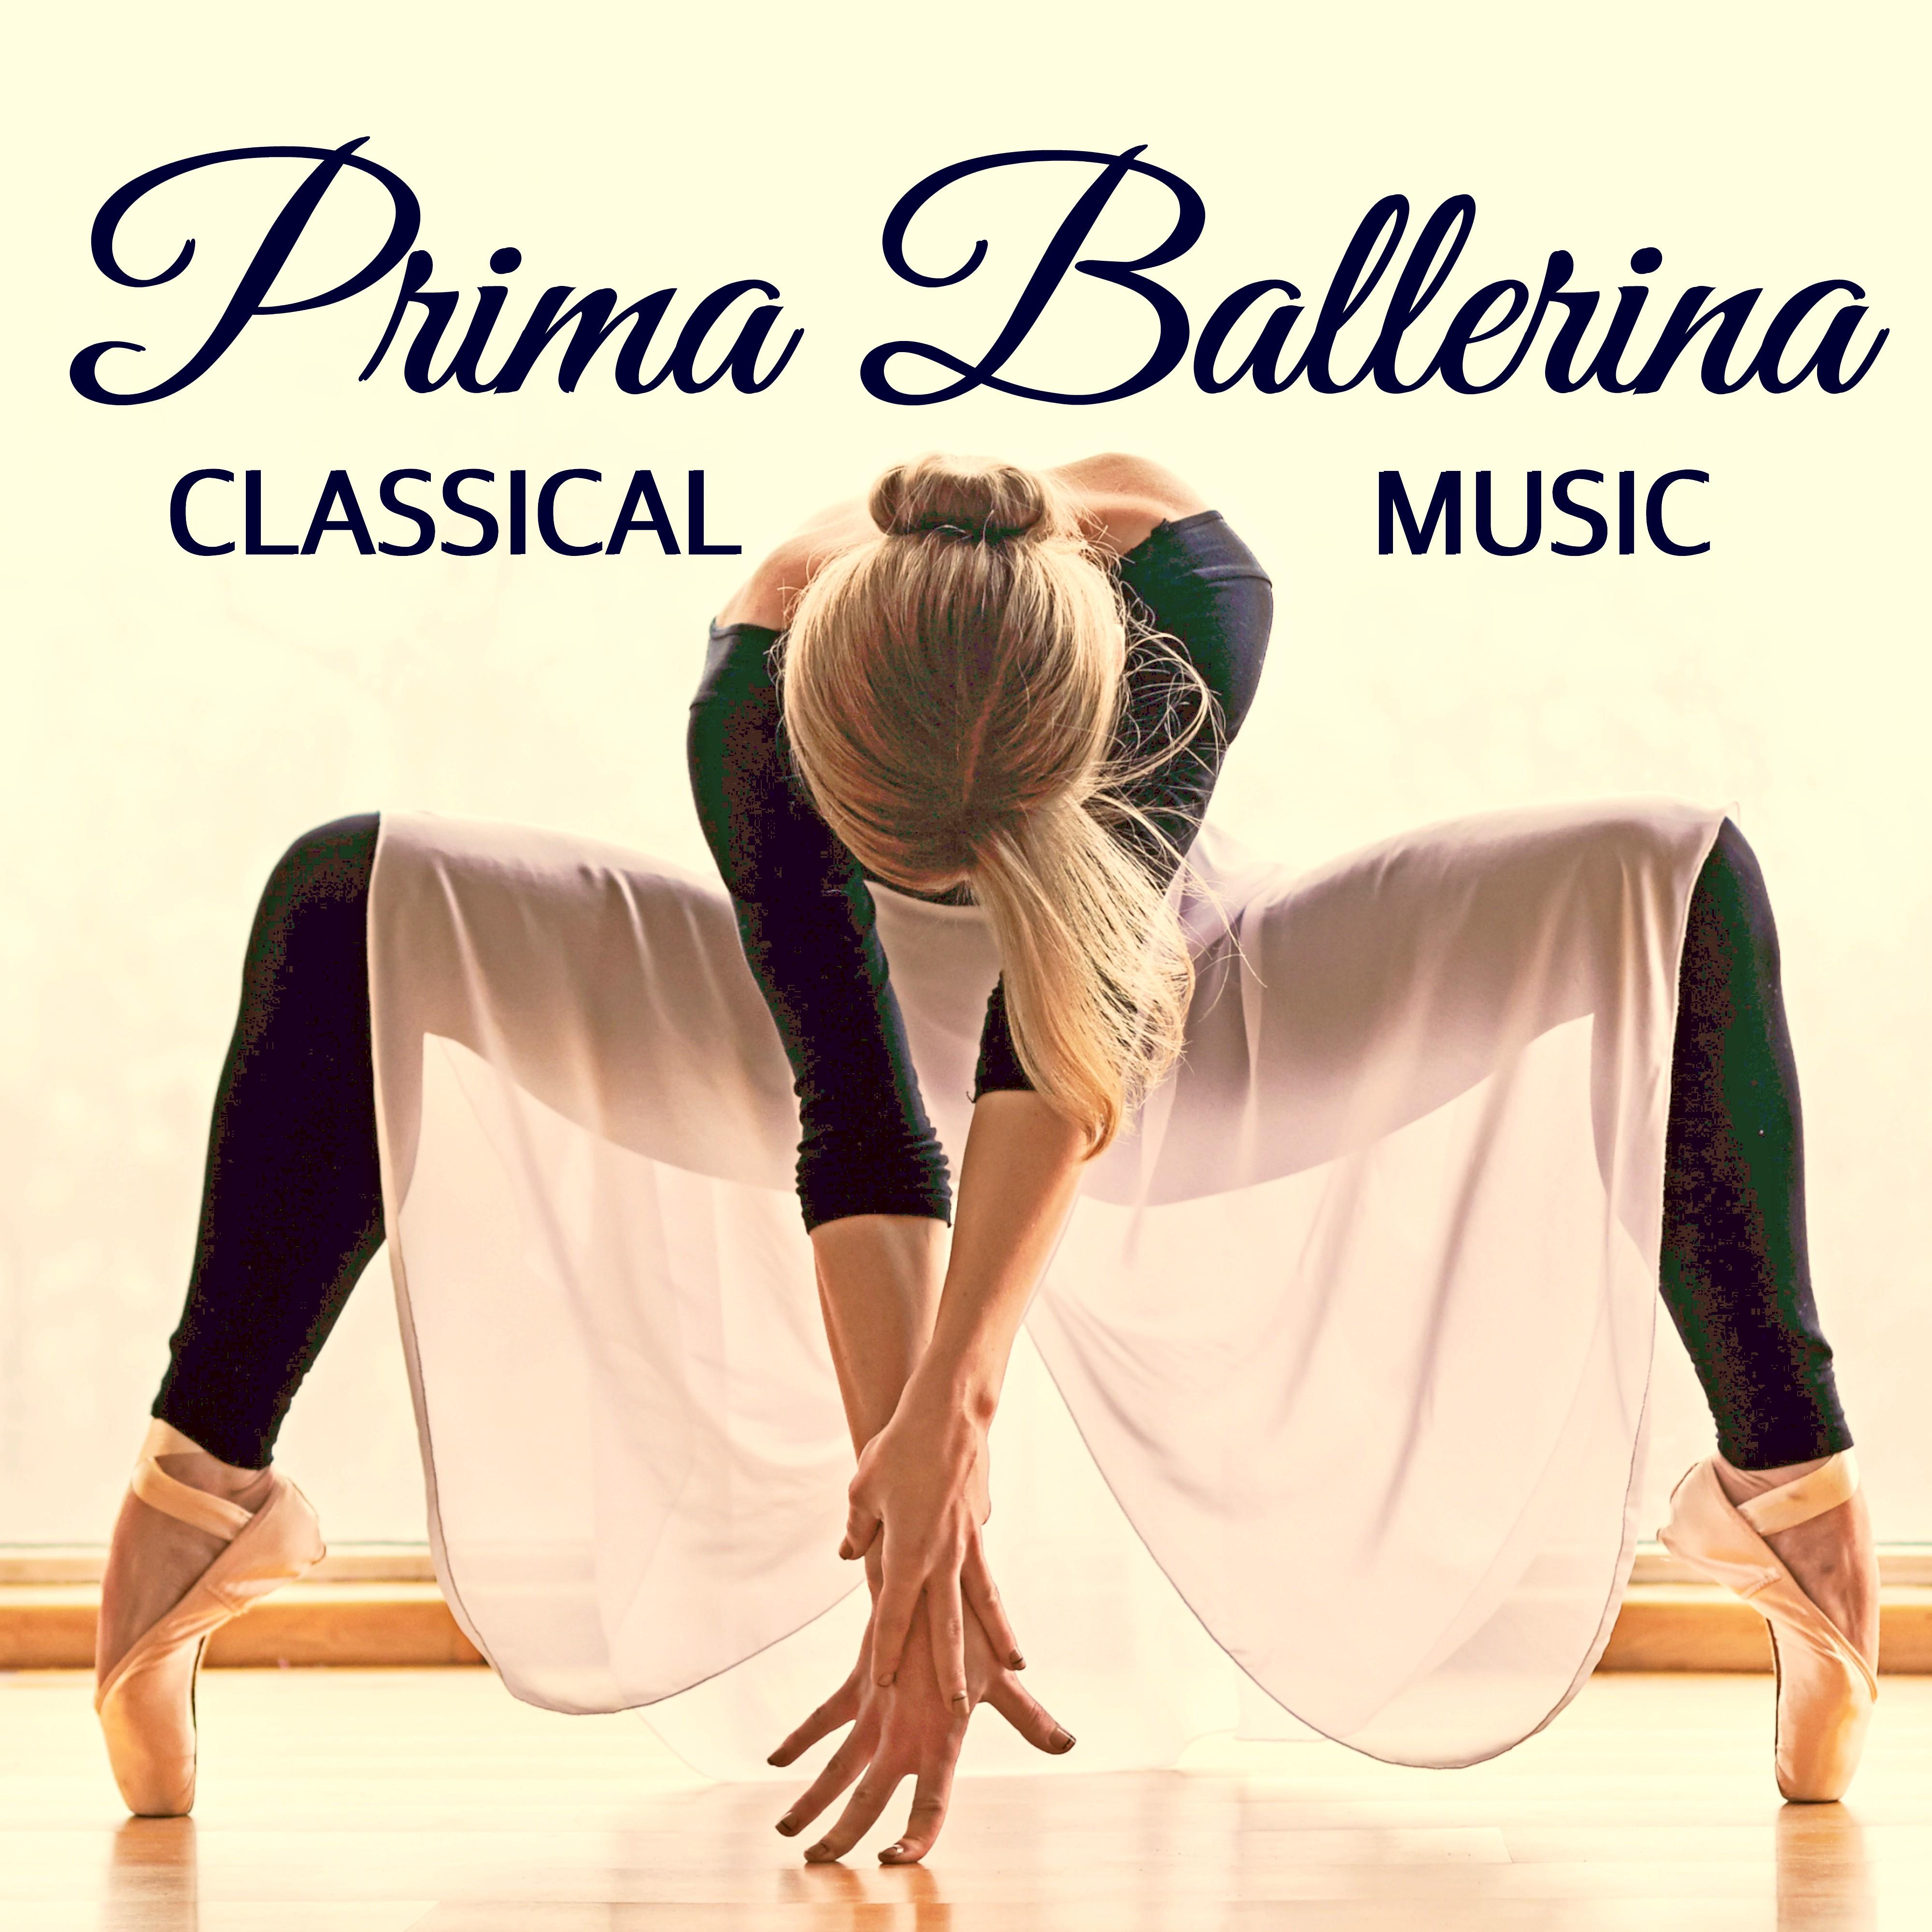 Prima Ballerina Classical Music - Solo Piano Songs and Music Tunes for Classical Ballet Class & Dance Class for Kids